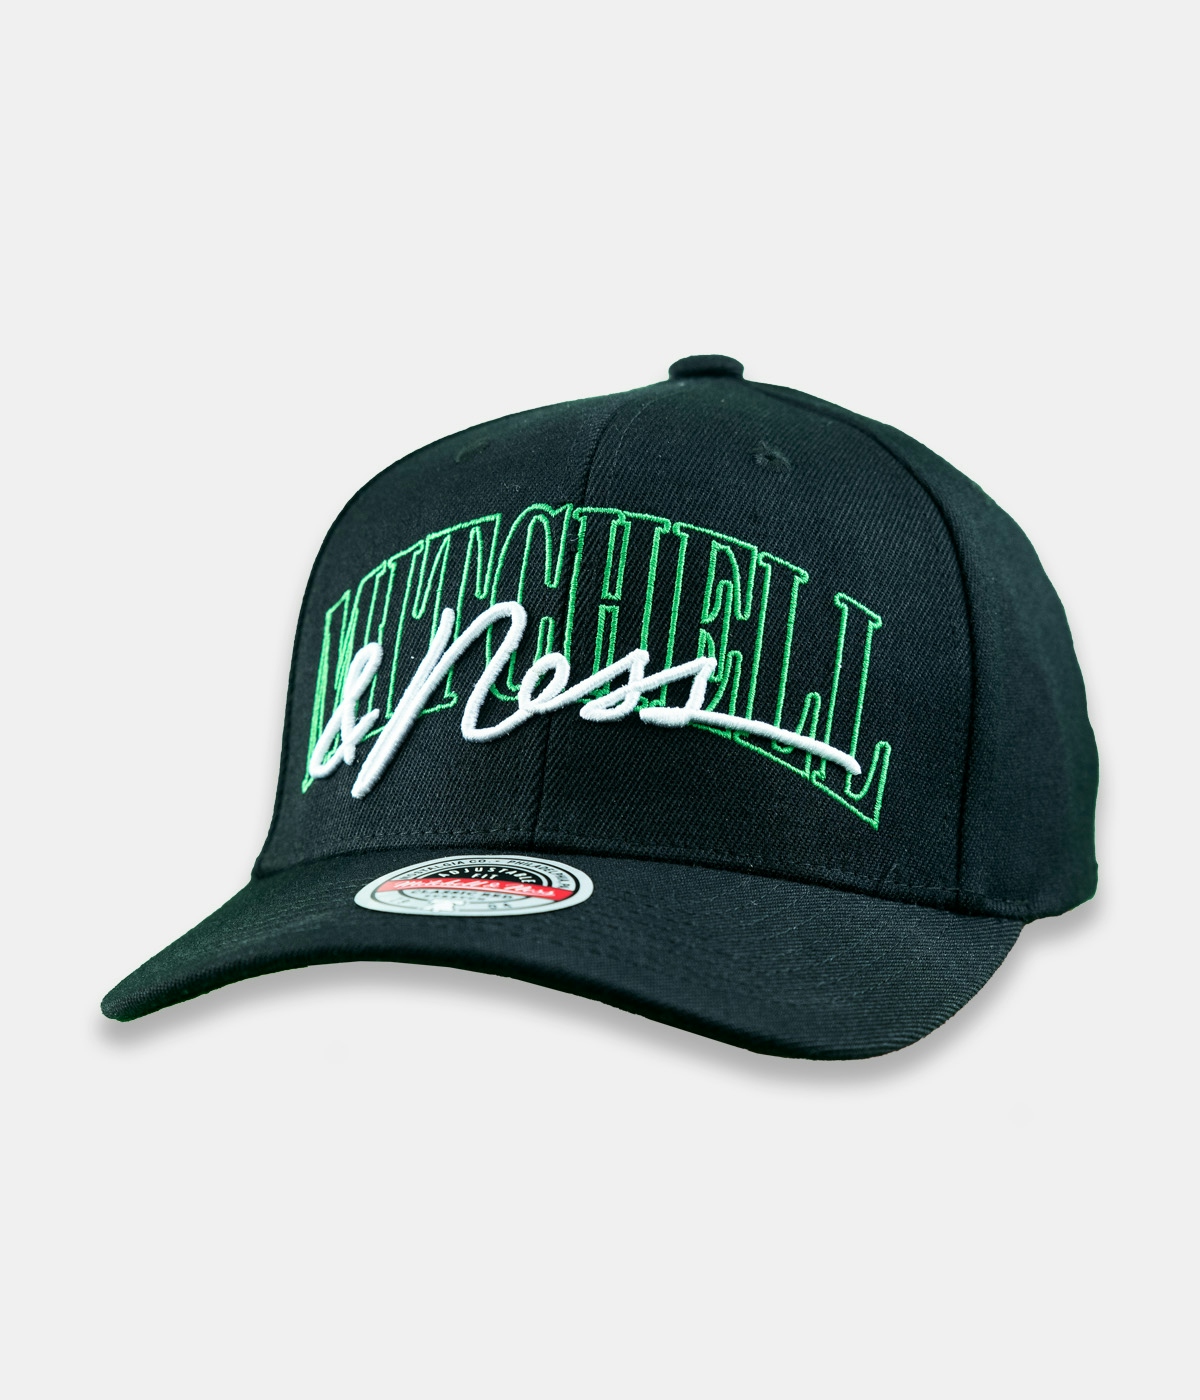 Mitchell & Ness Cap Zone Classic Red - Own Brand Green 1